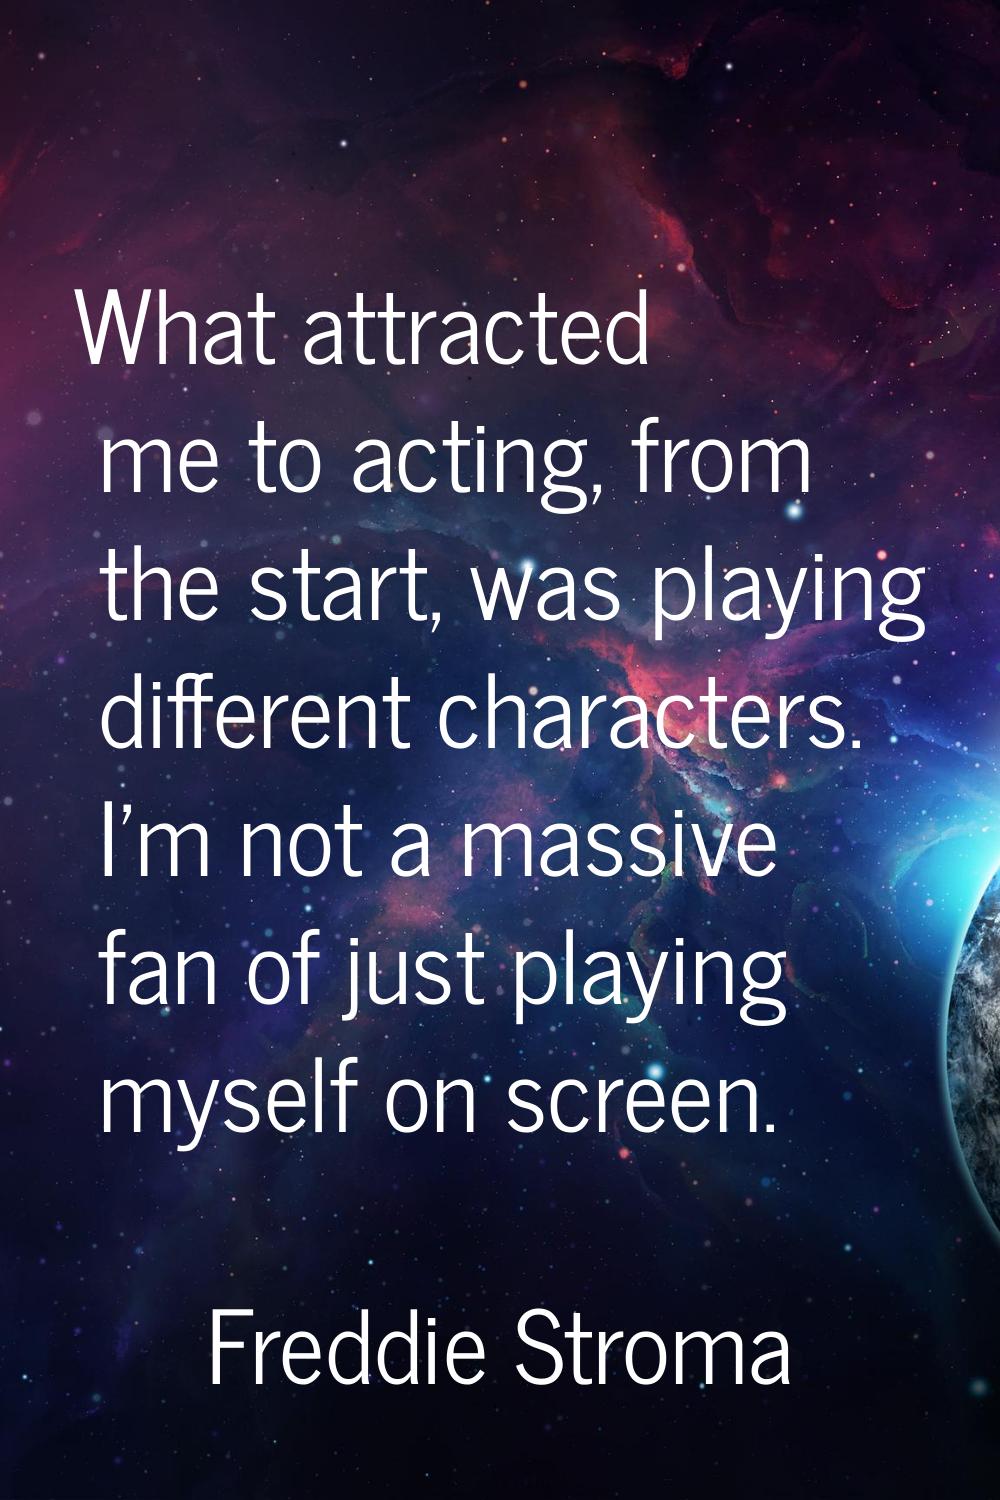 What attracted me to acting, from the start, was playing different characters. I'm not a massive fa